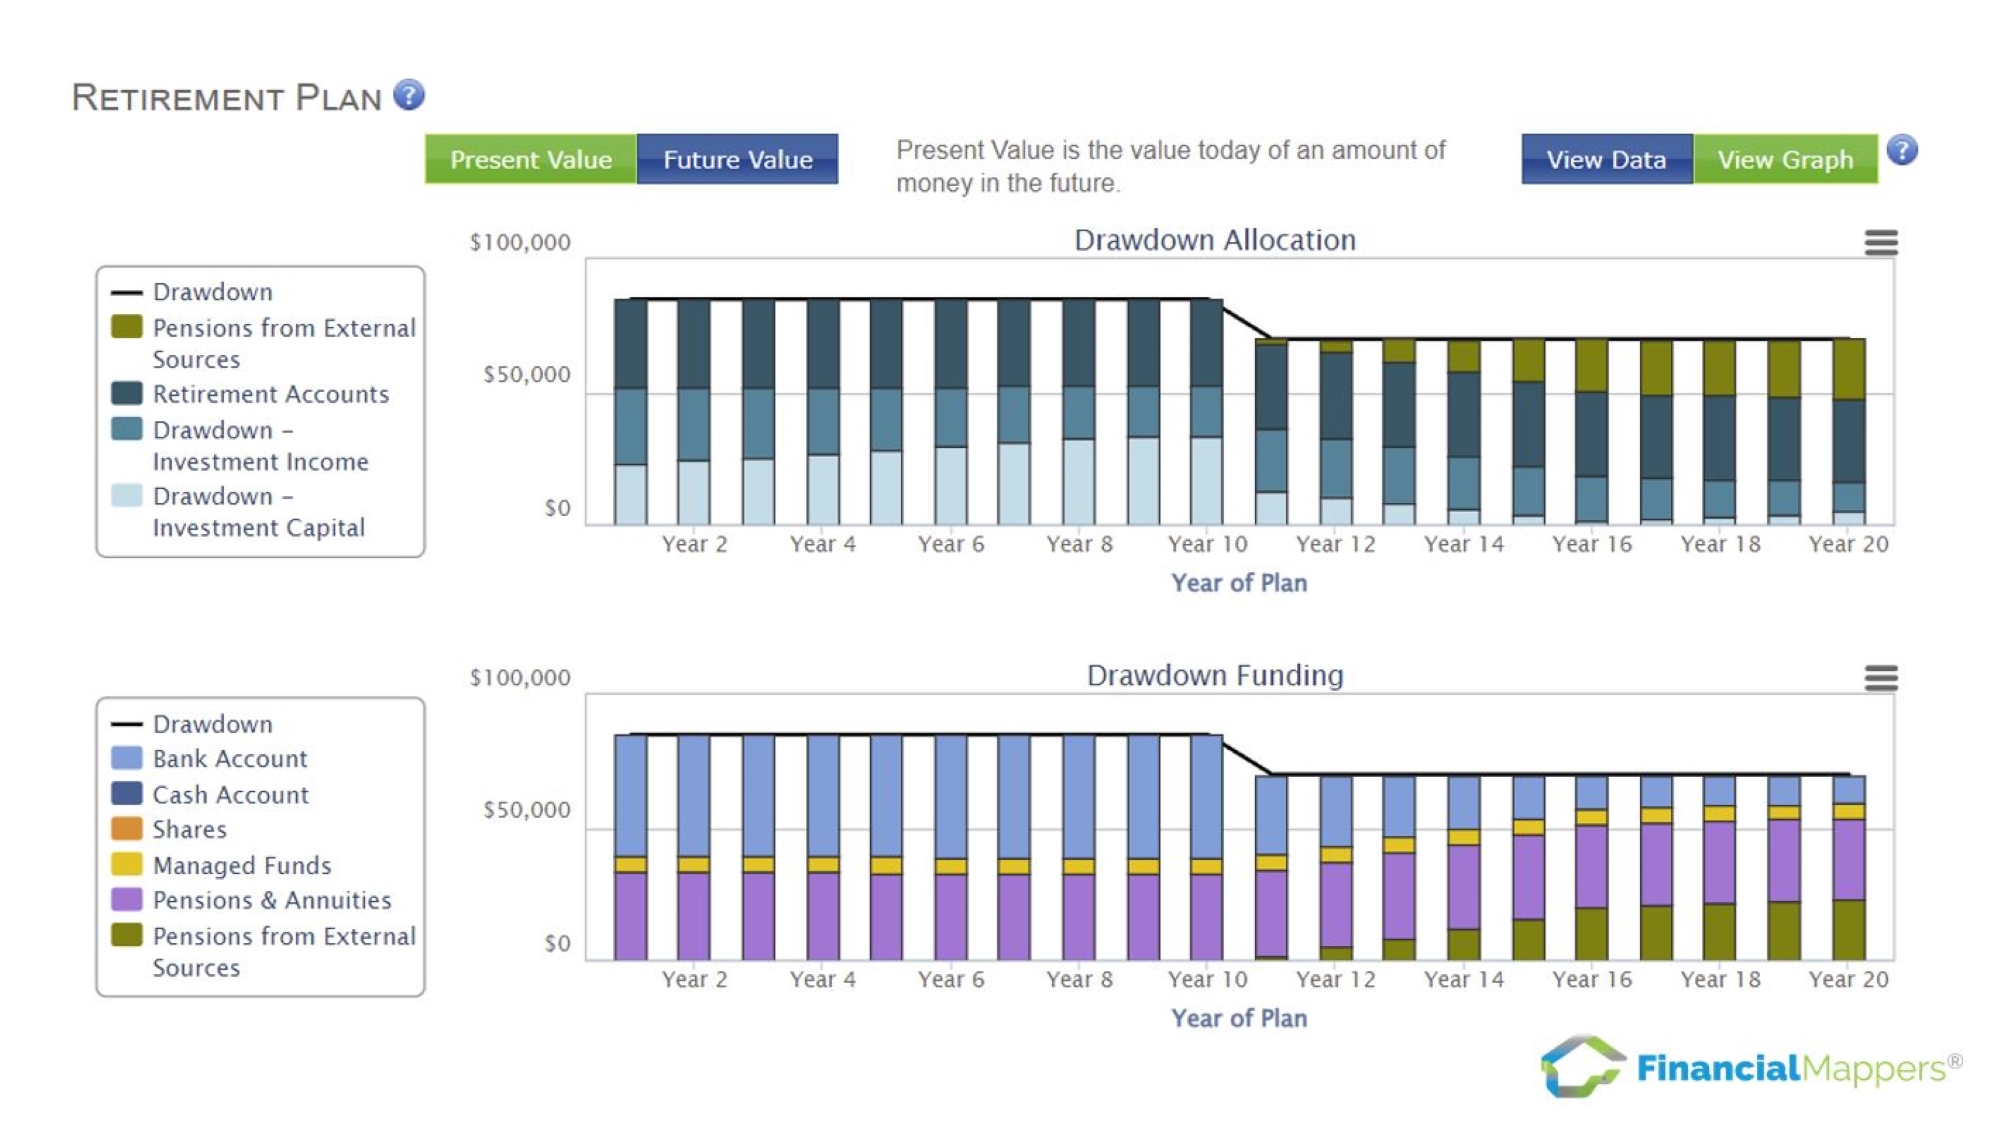 Screenshot of Retirement Plan by Drawdown Allocation and by Funding Accounts, including Means Tested Pensions in financial planning software